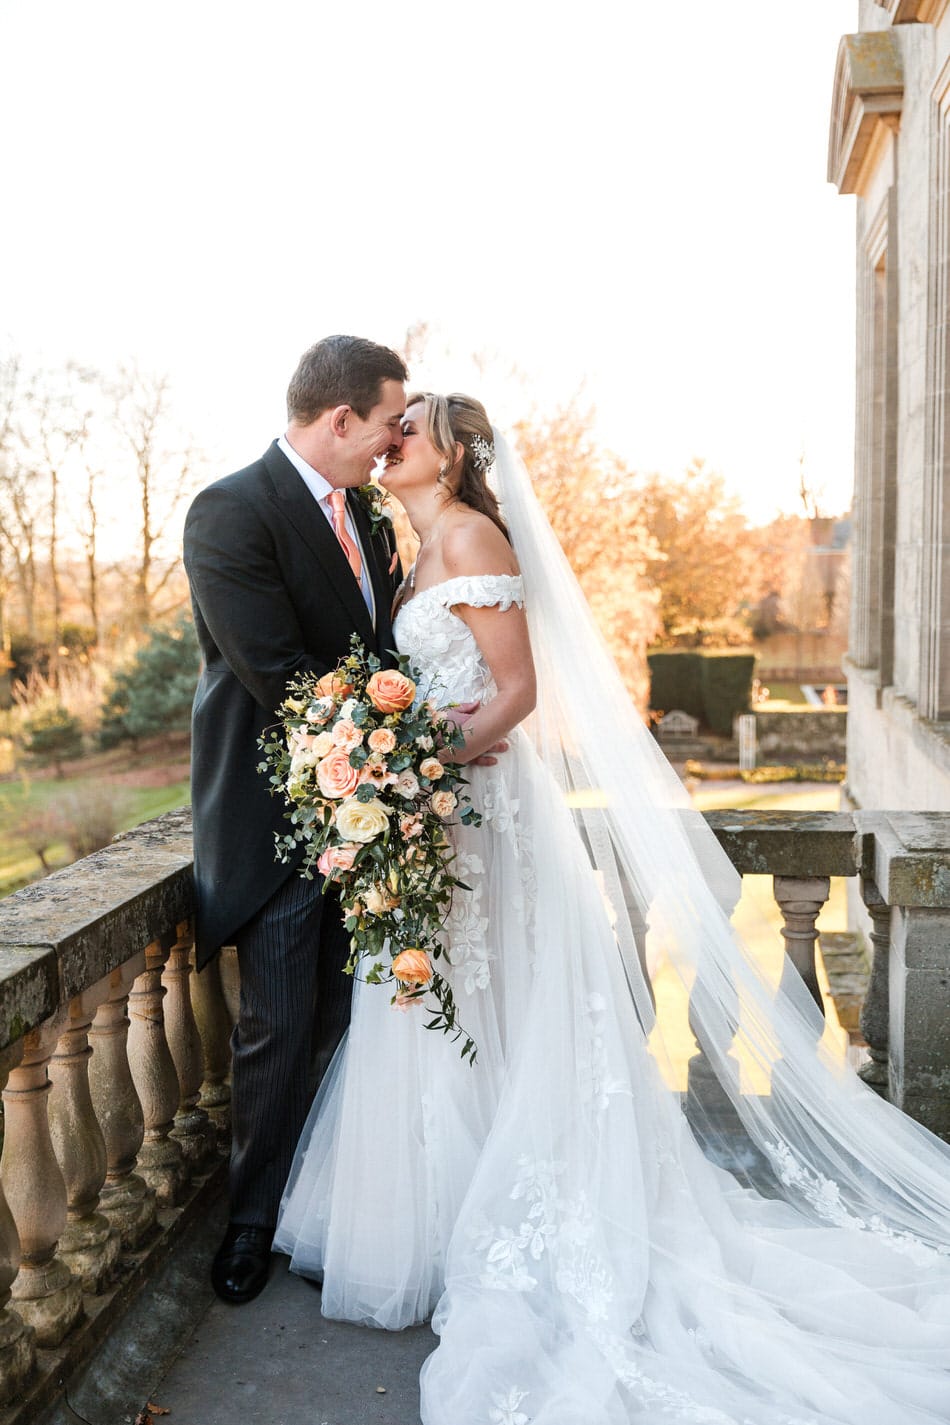 Bride and Groom share a kiss on the balcony at Bourton Hall. Bride wears floaty off the shoulder wedding dress, with full length veil